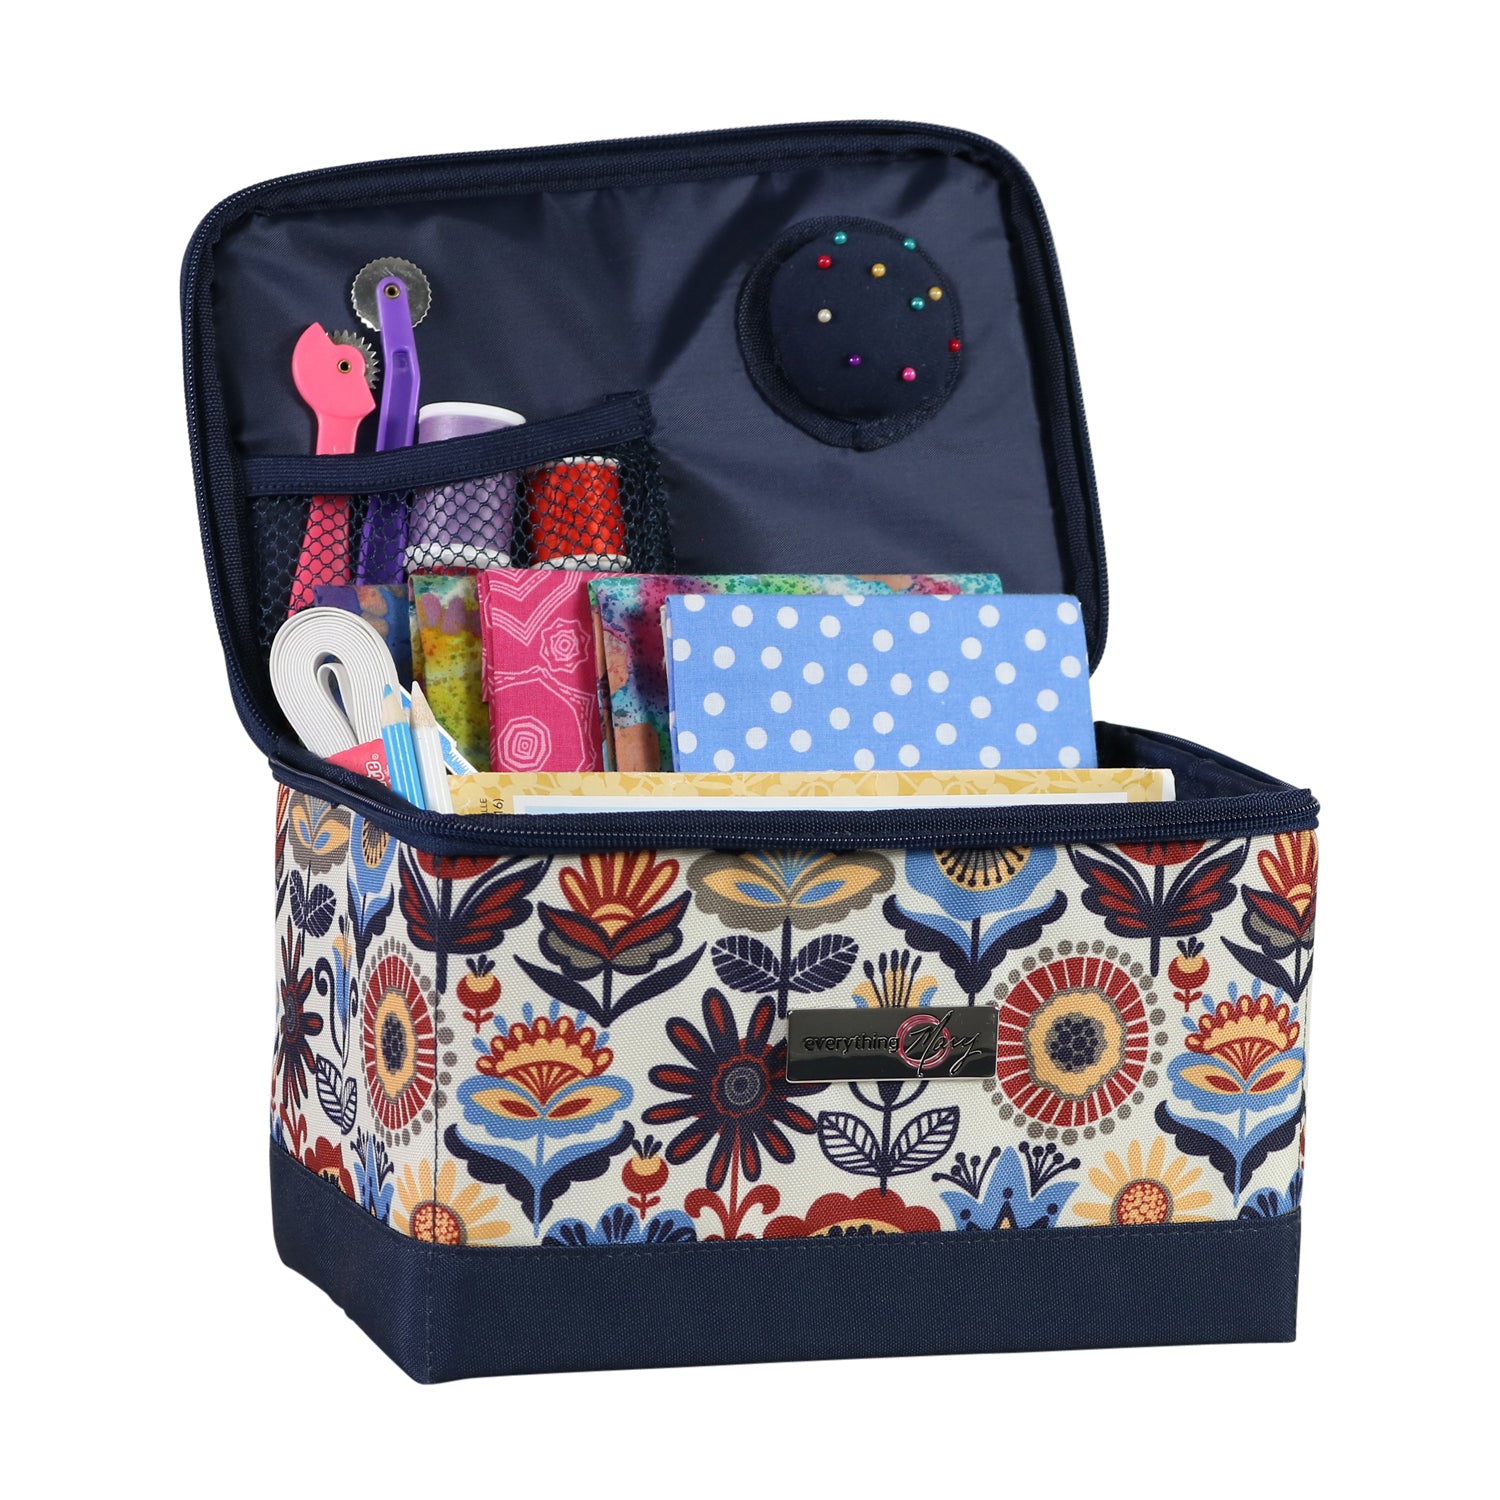 Everything Mary Sewing Kit Organizer Box, Black Floral - Supplies Stor